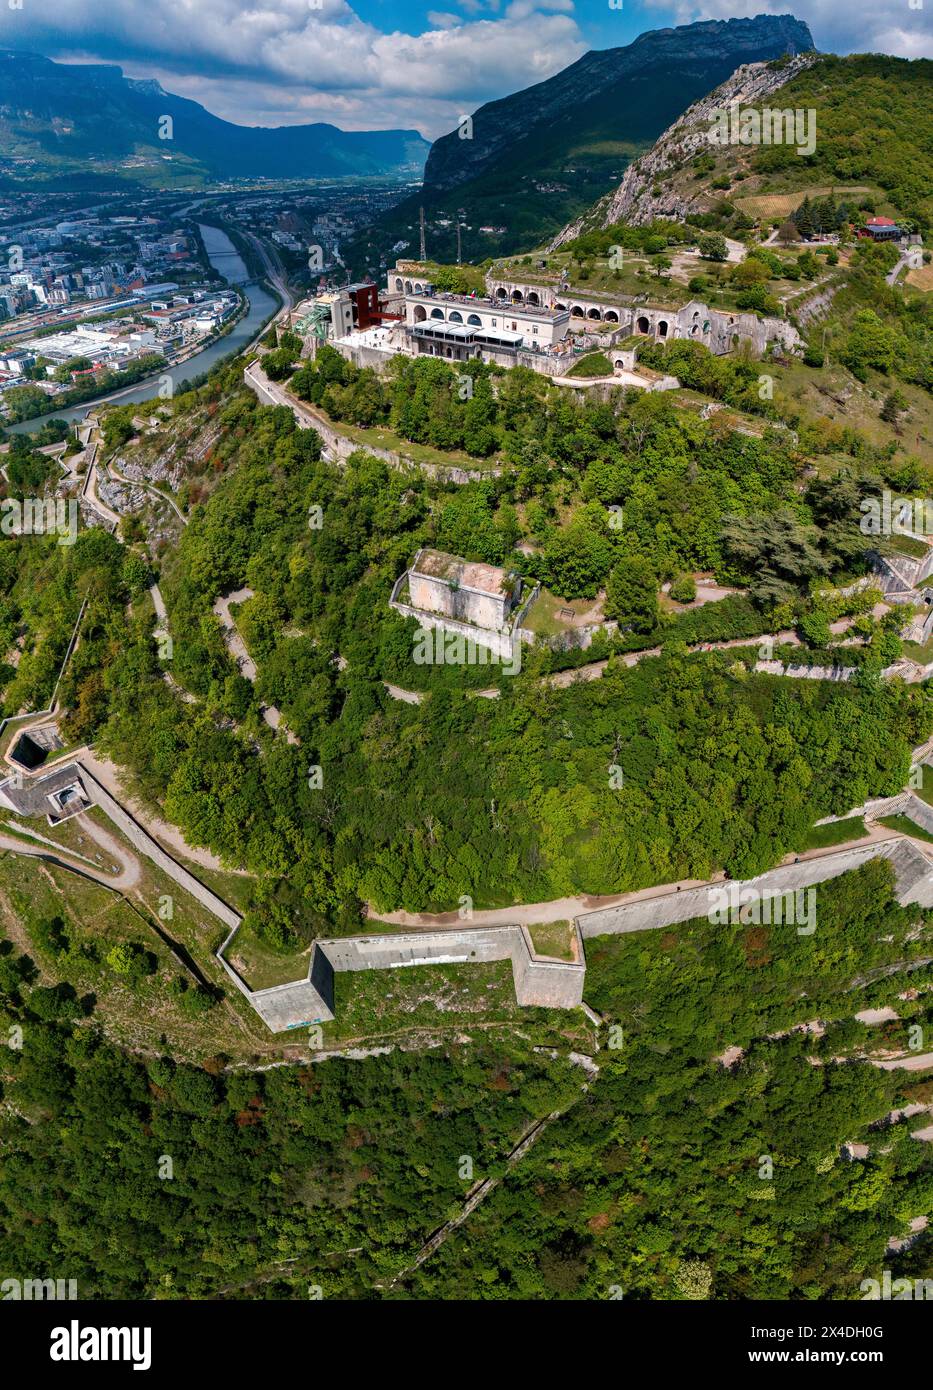 Aerial view of Grenoble's Bastille fort, city skyline crossed by the river and surrounded by mountains. France Stock Photo